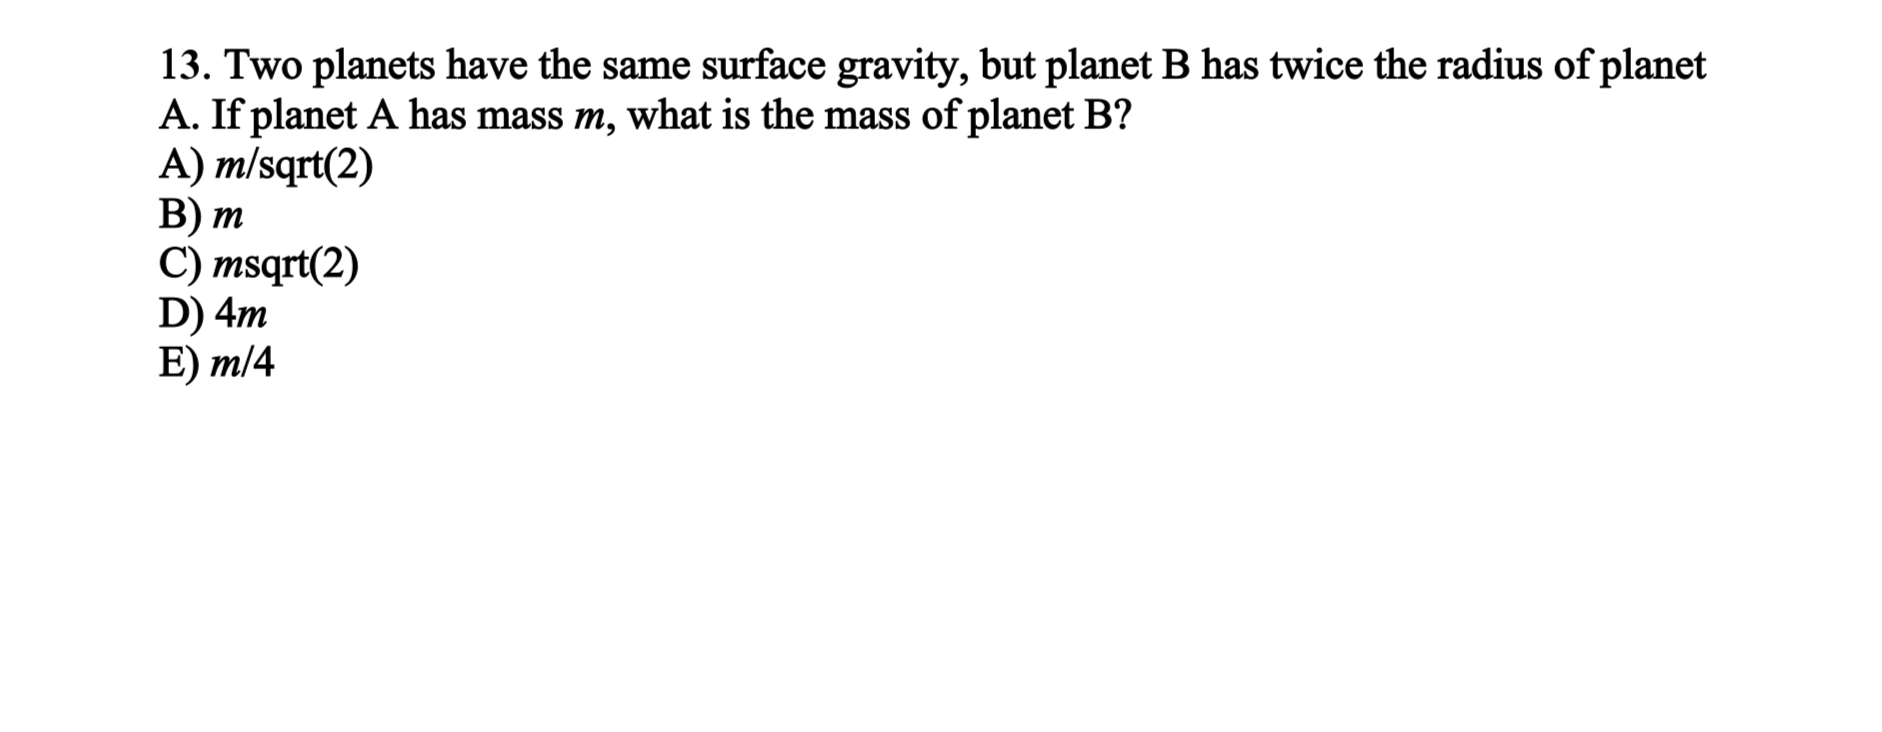 surface gravity of planets